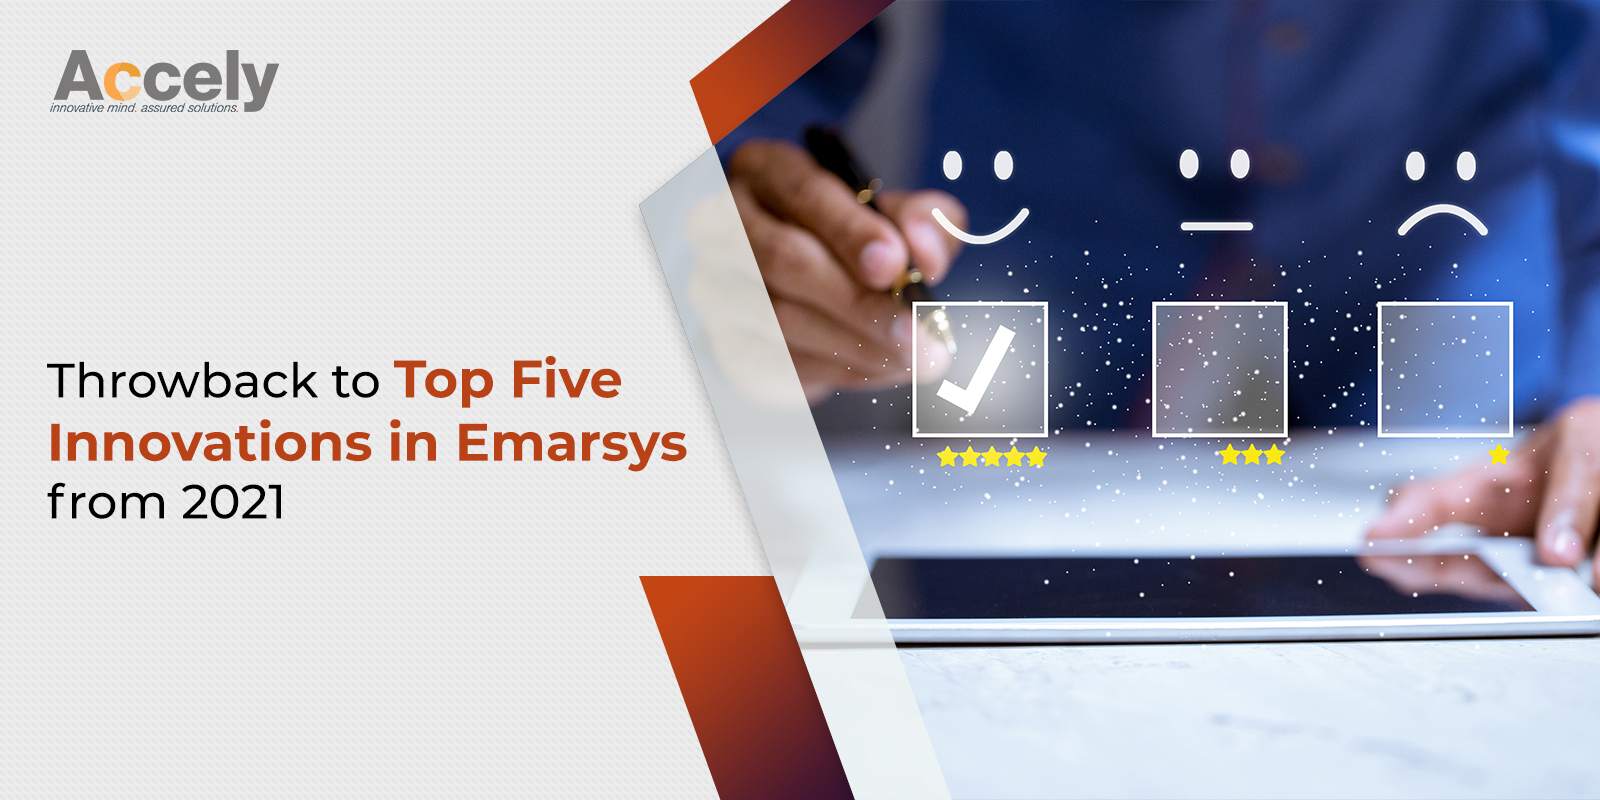 Throwback to Top Five Innovations in Emarsys from 2021